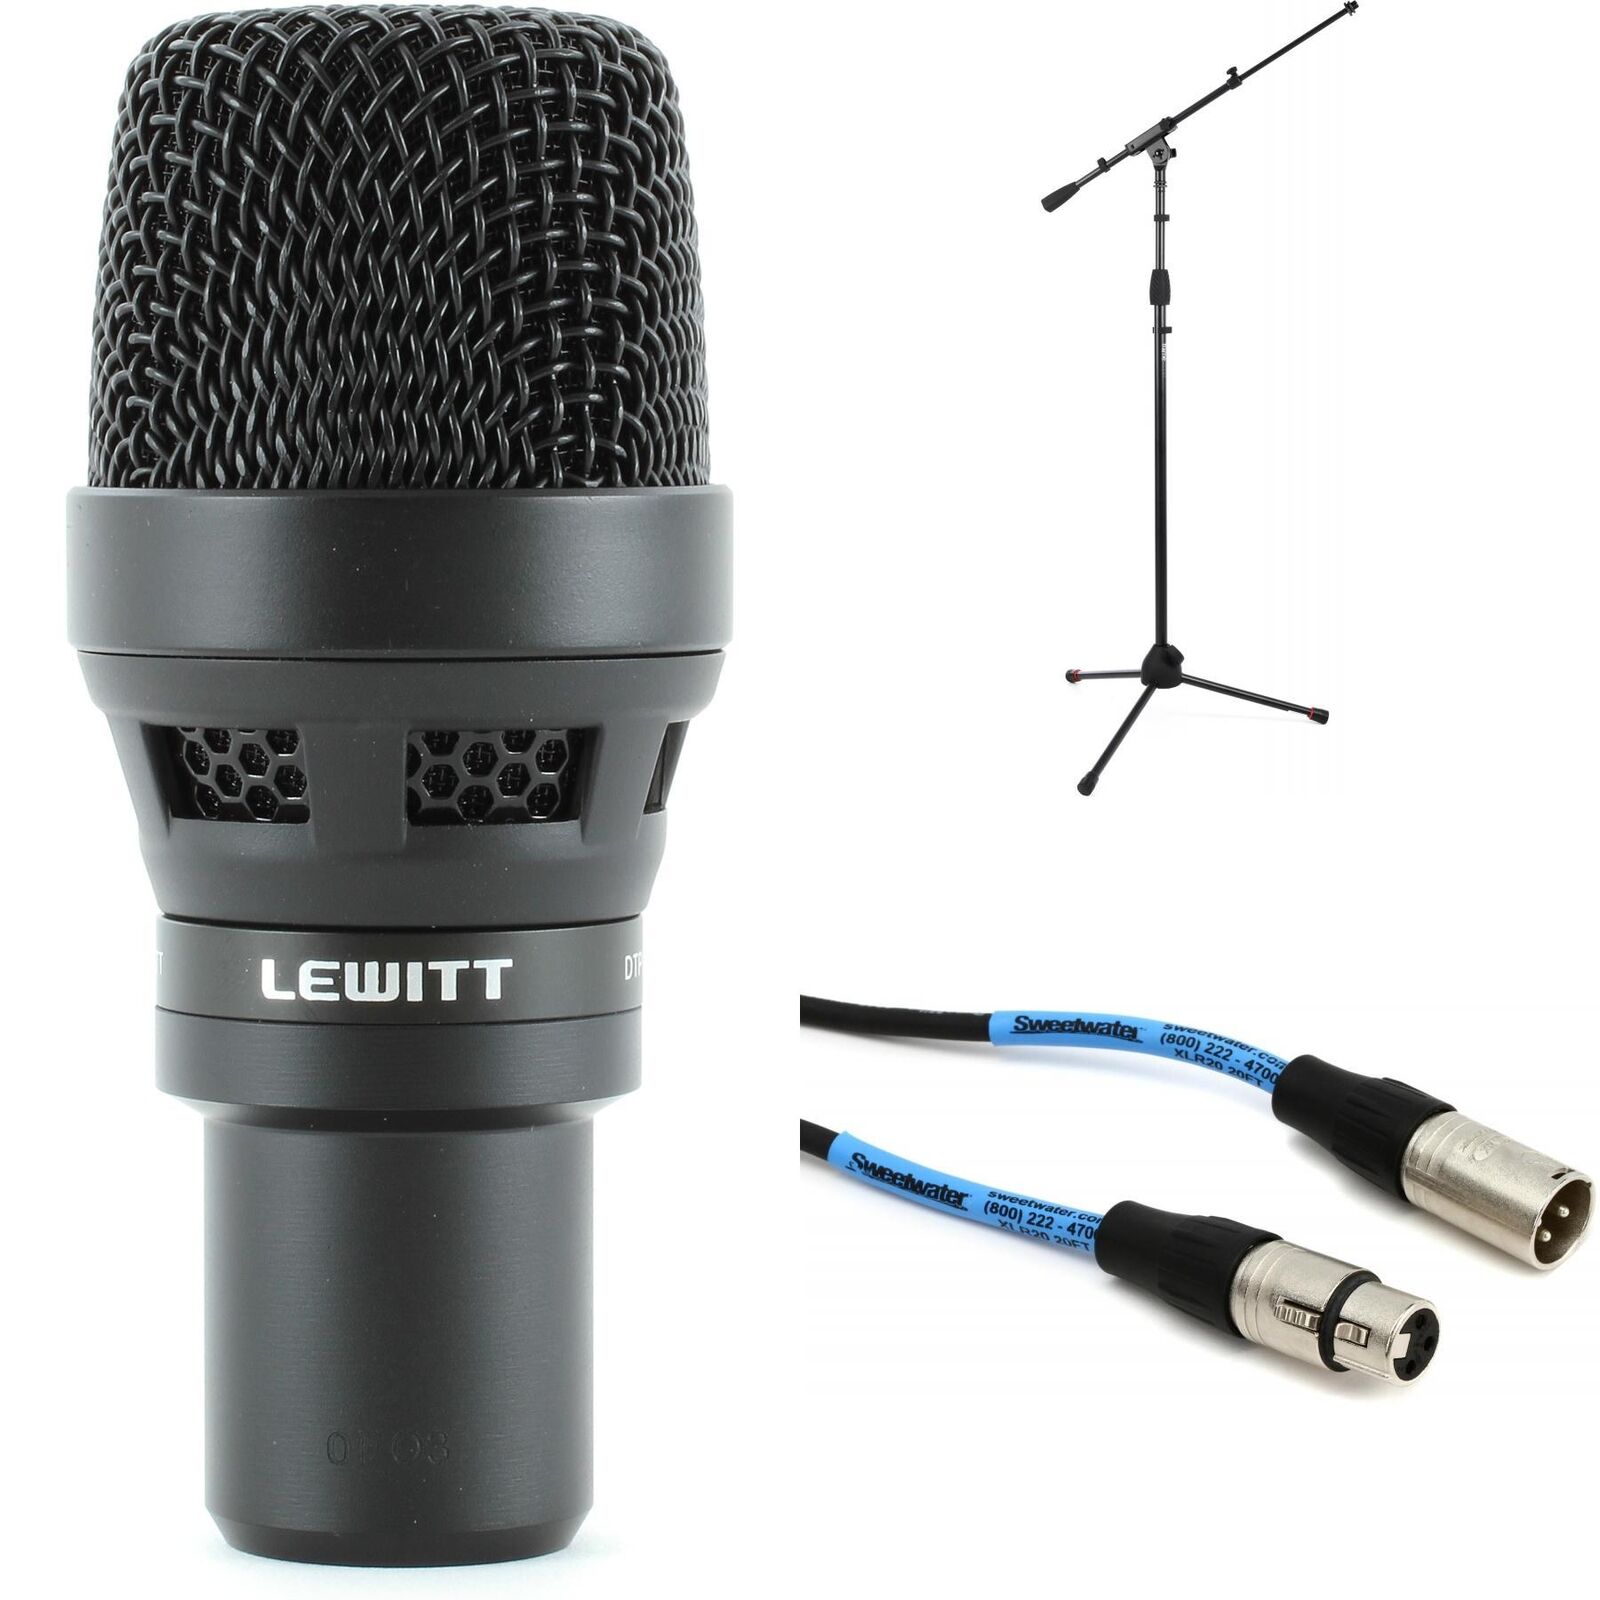 Lewitt Dtp 340 Tt Dynamic Instrument Microphone With Stand And Cable